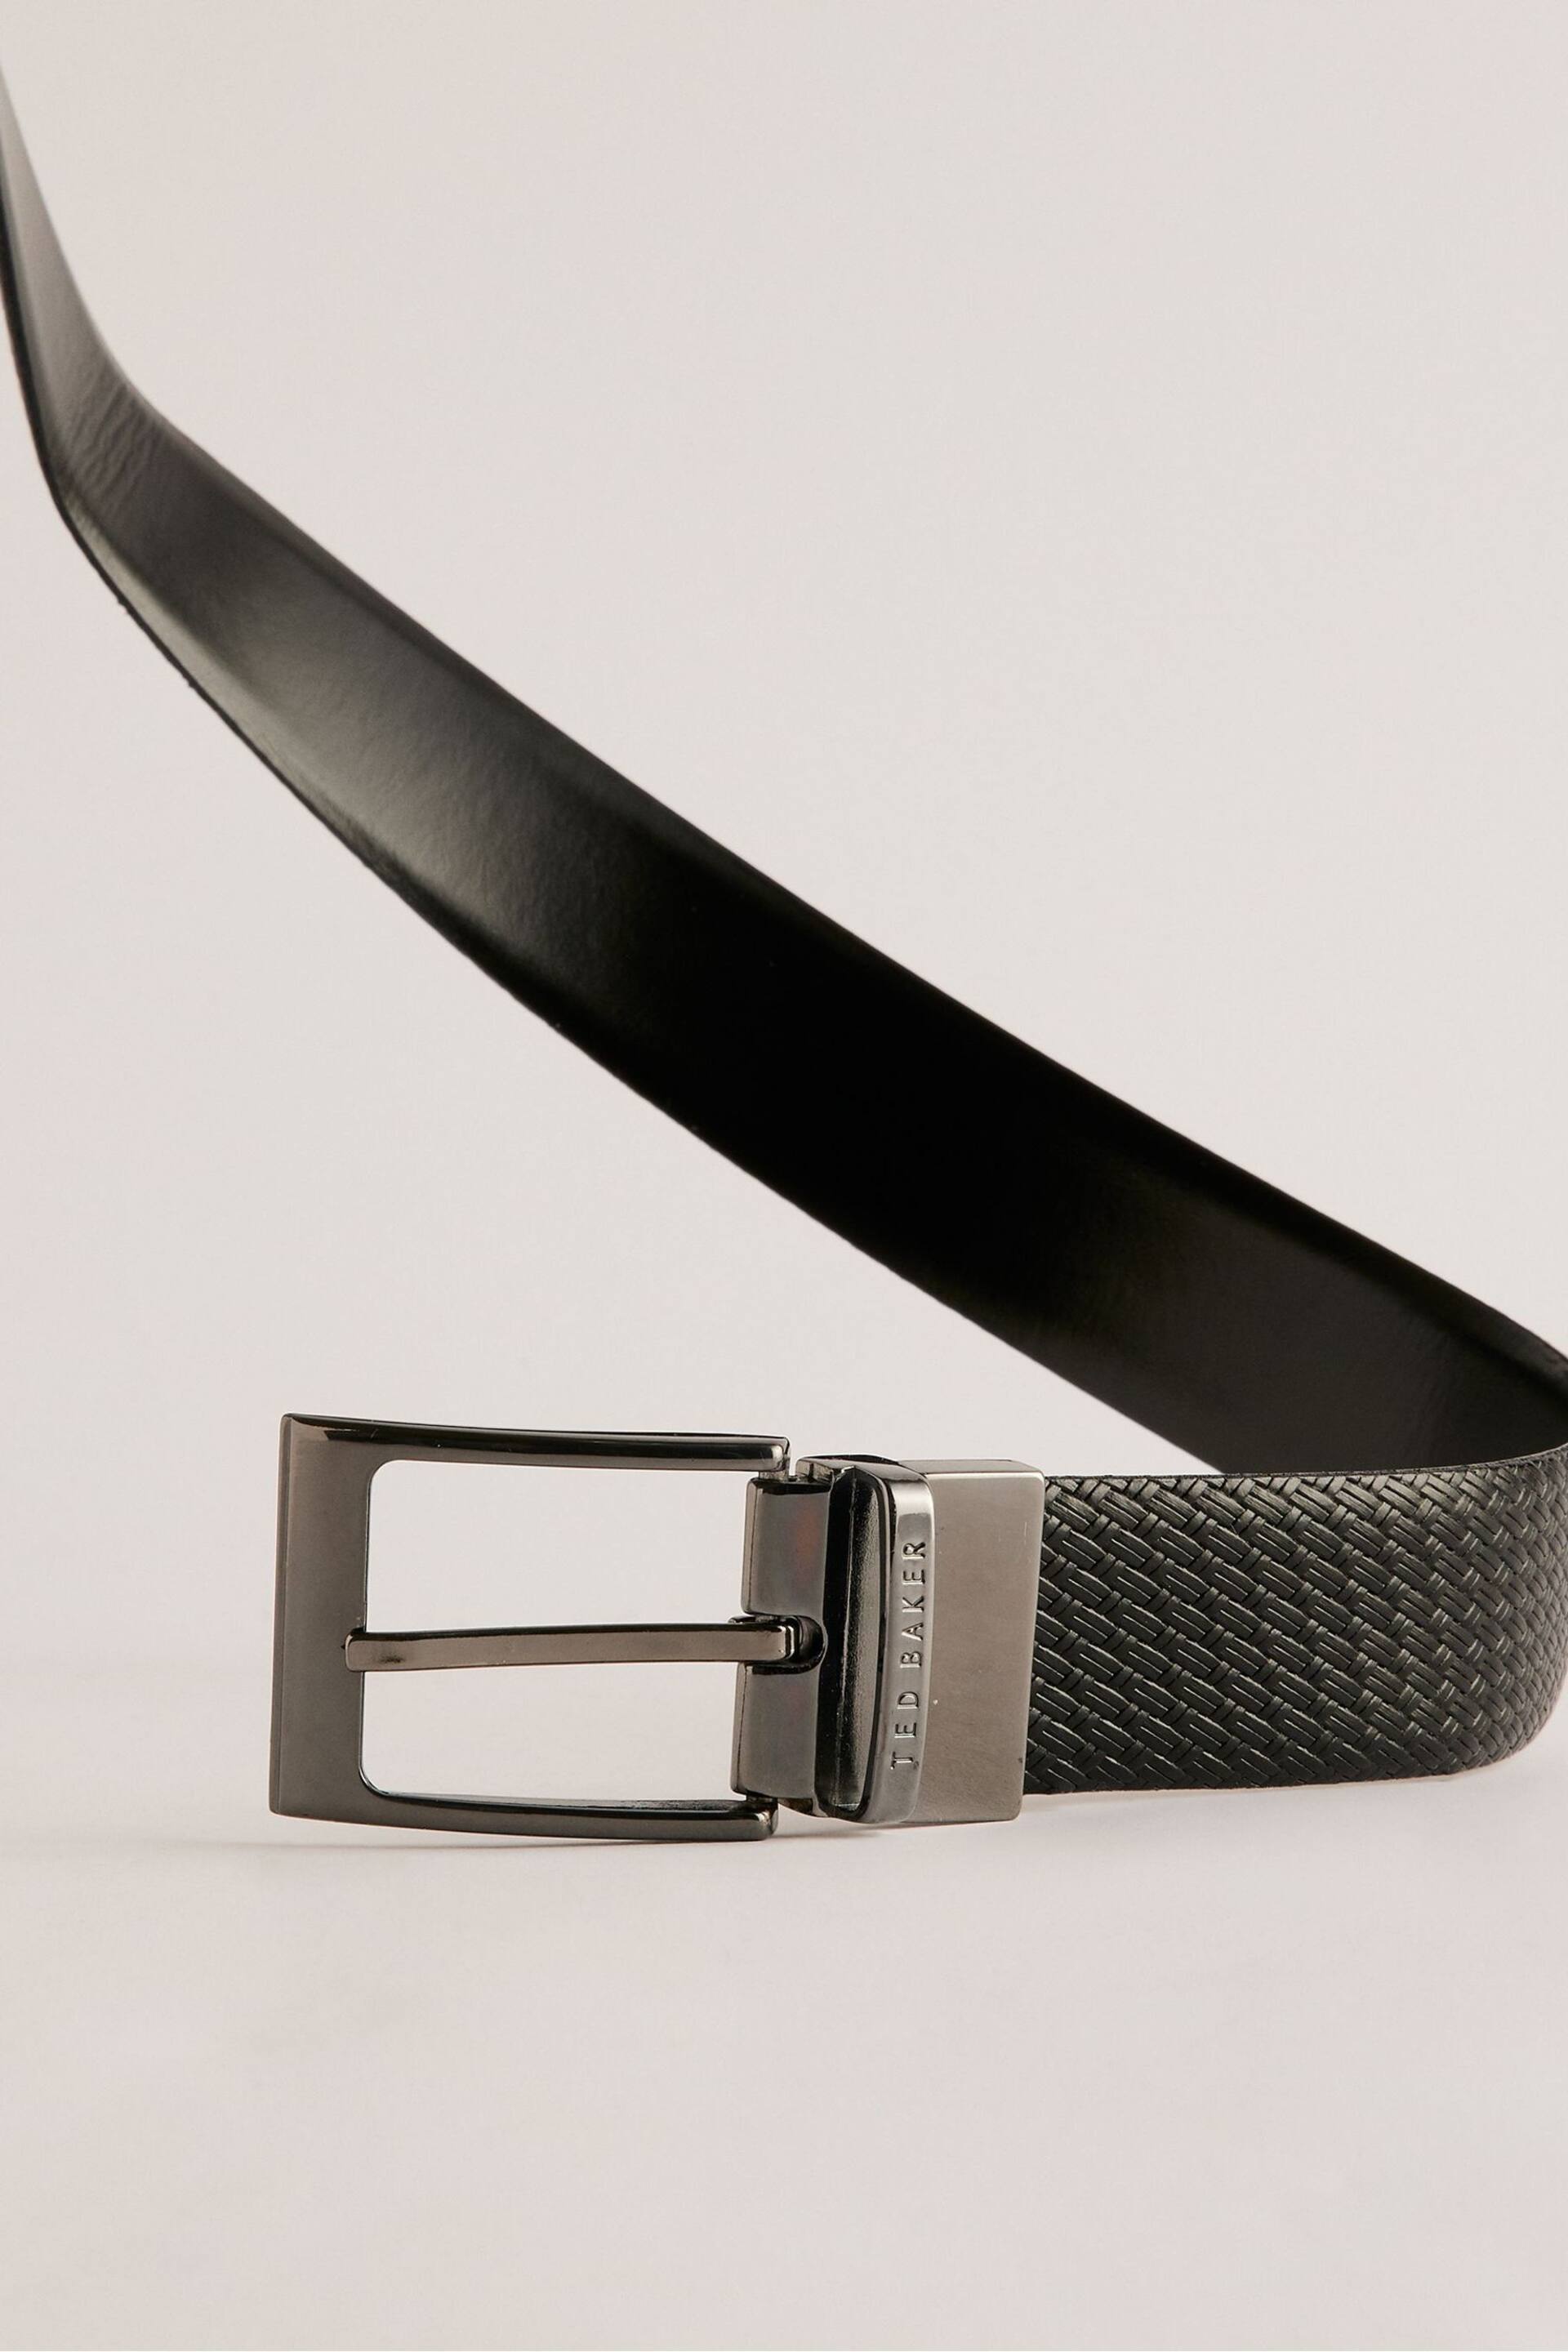 Ted Baker Black Waide Woven Texture Leather Belt - Image 4 of 4